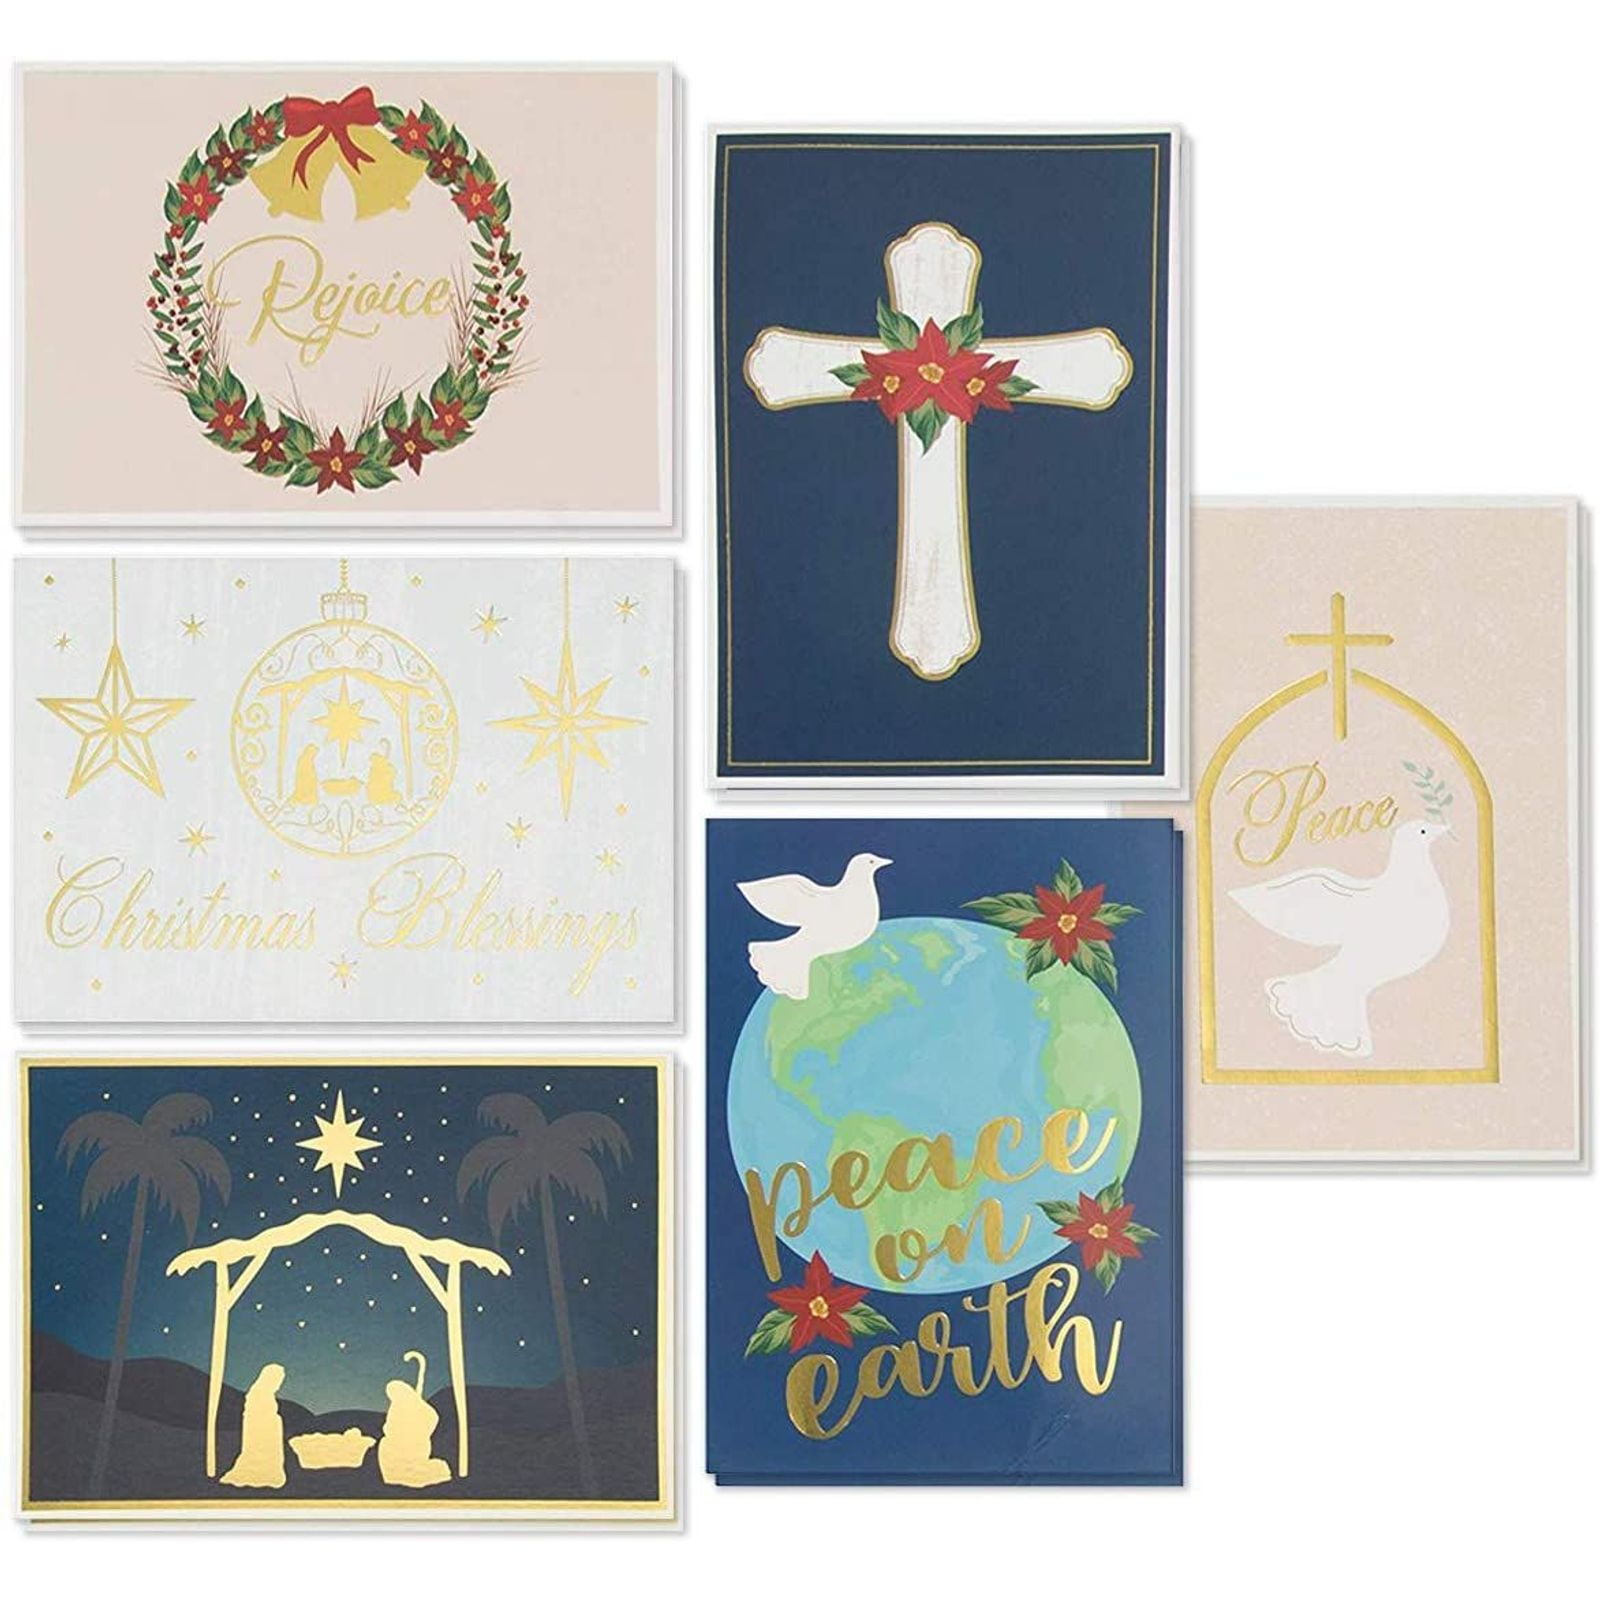 Details about   Religious Christmas Cards 20cm X 14cm  8" X 5.5" with envelopes 